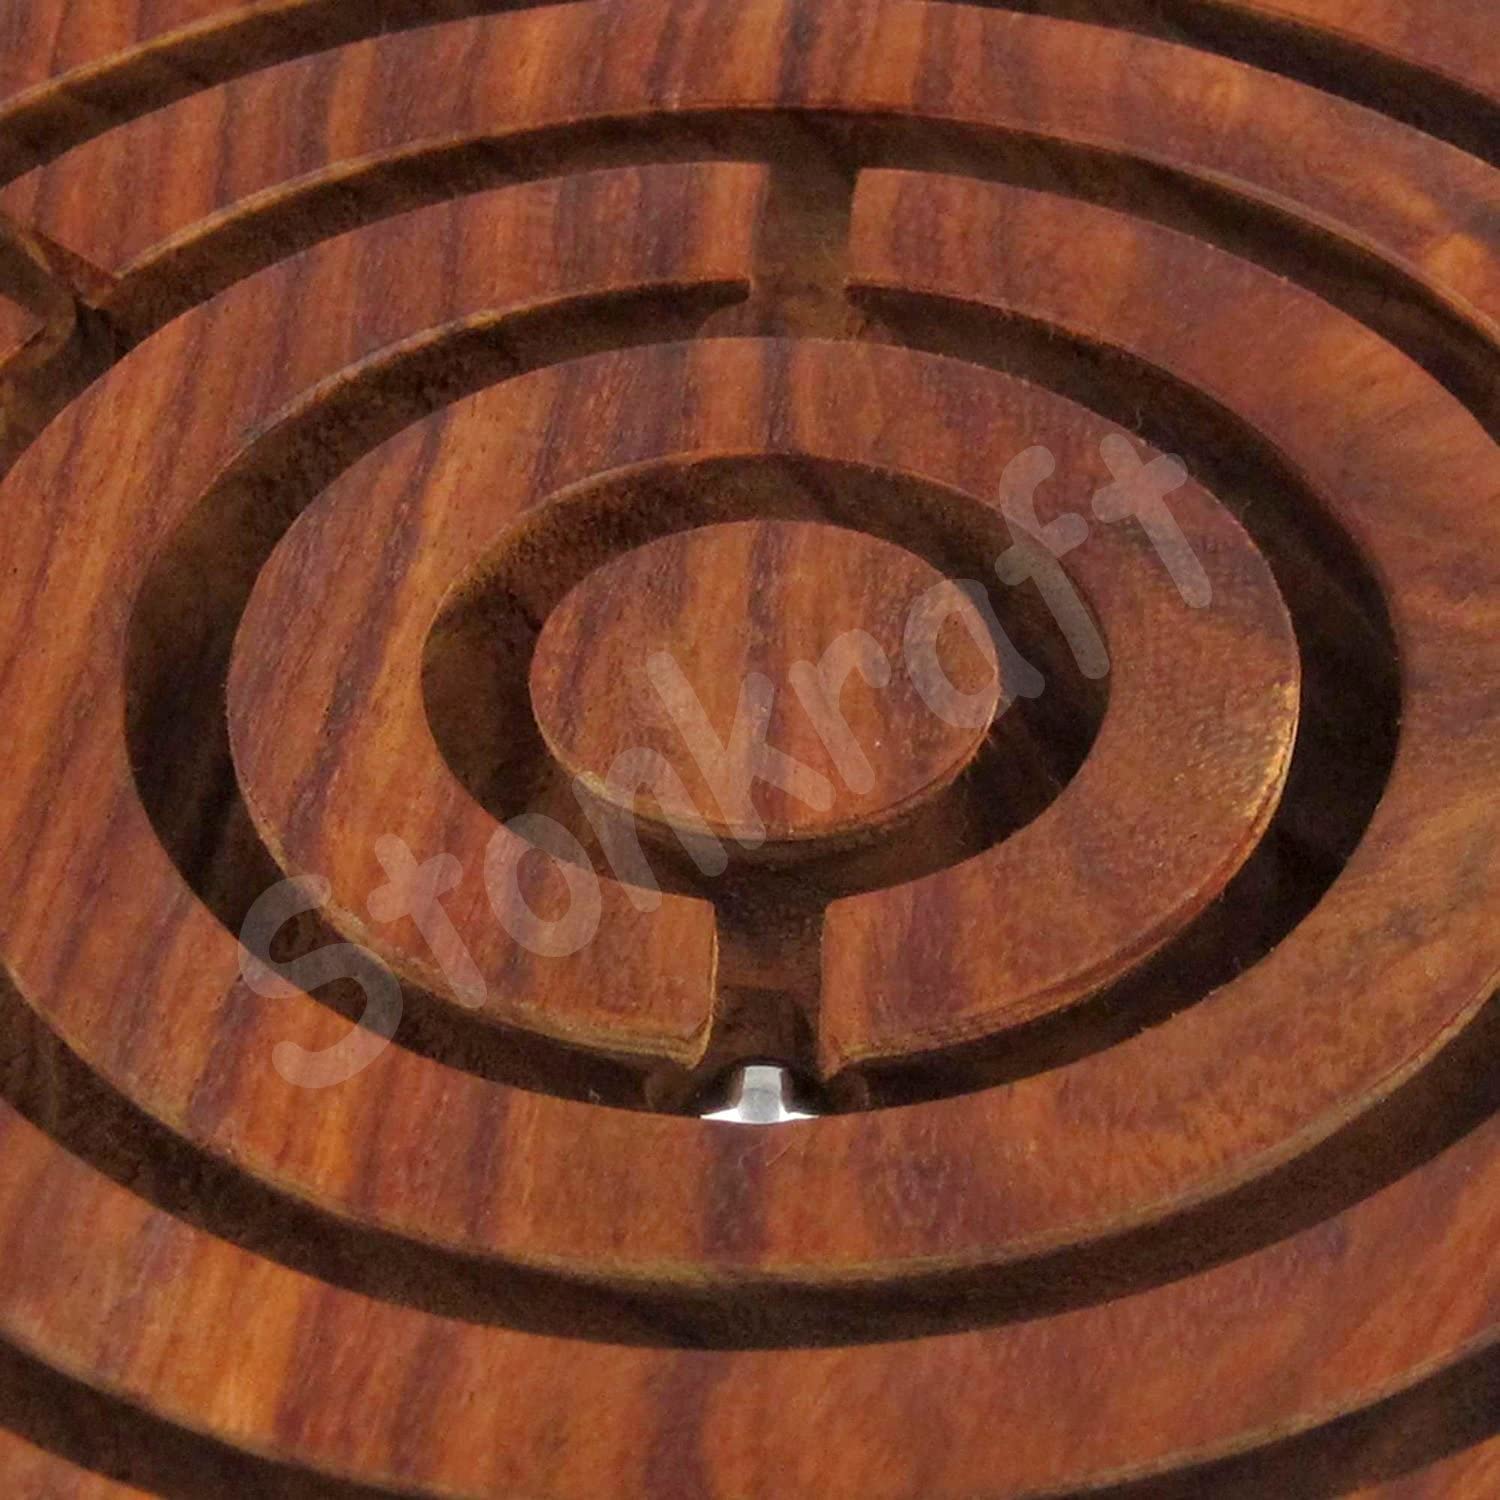 Wooden Game Labyrinth Ball in a Maze Puzzles Handcrafted Round Square 